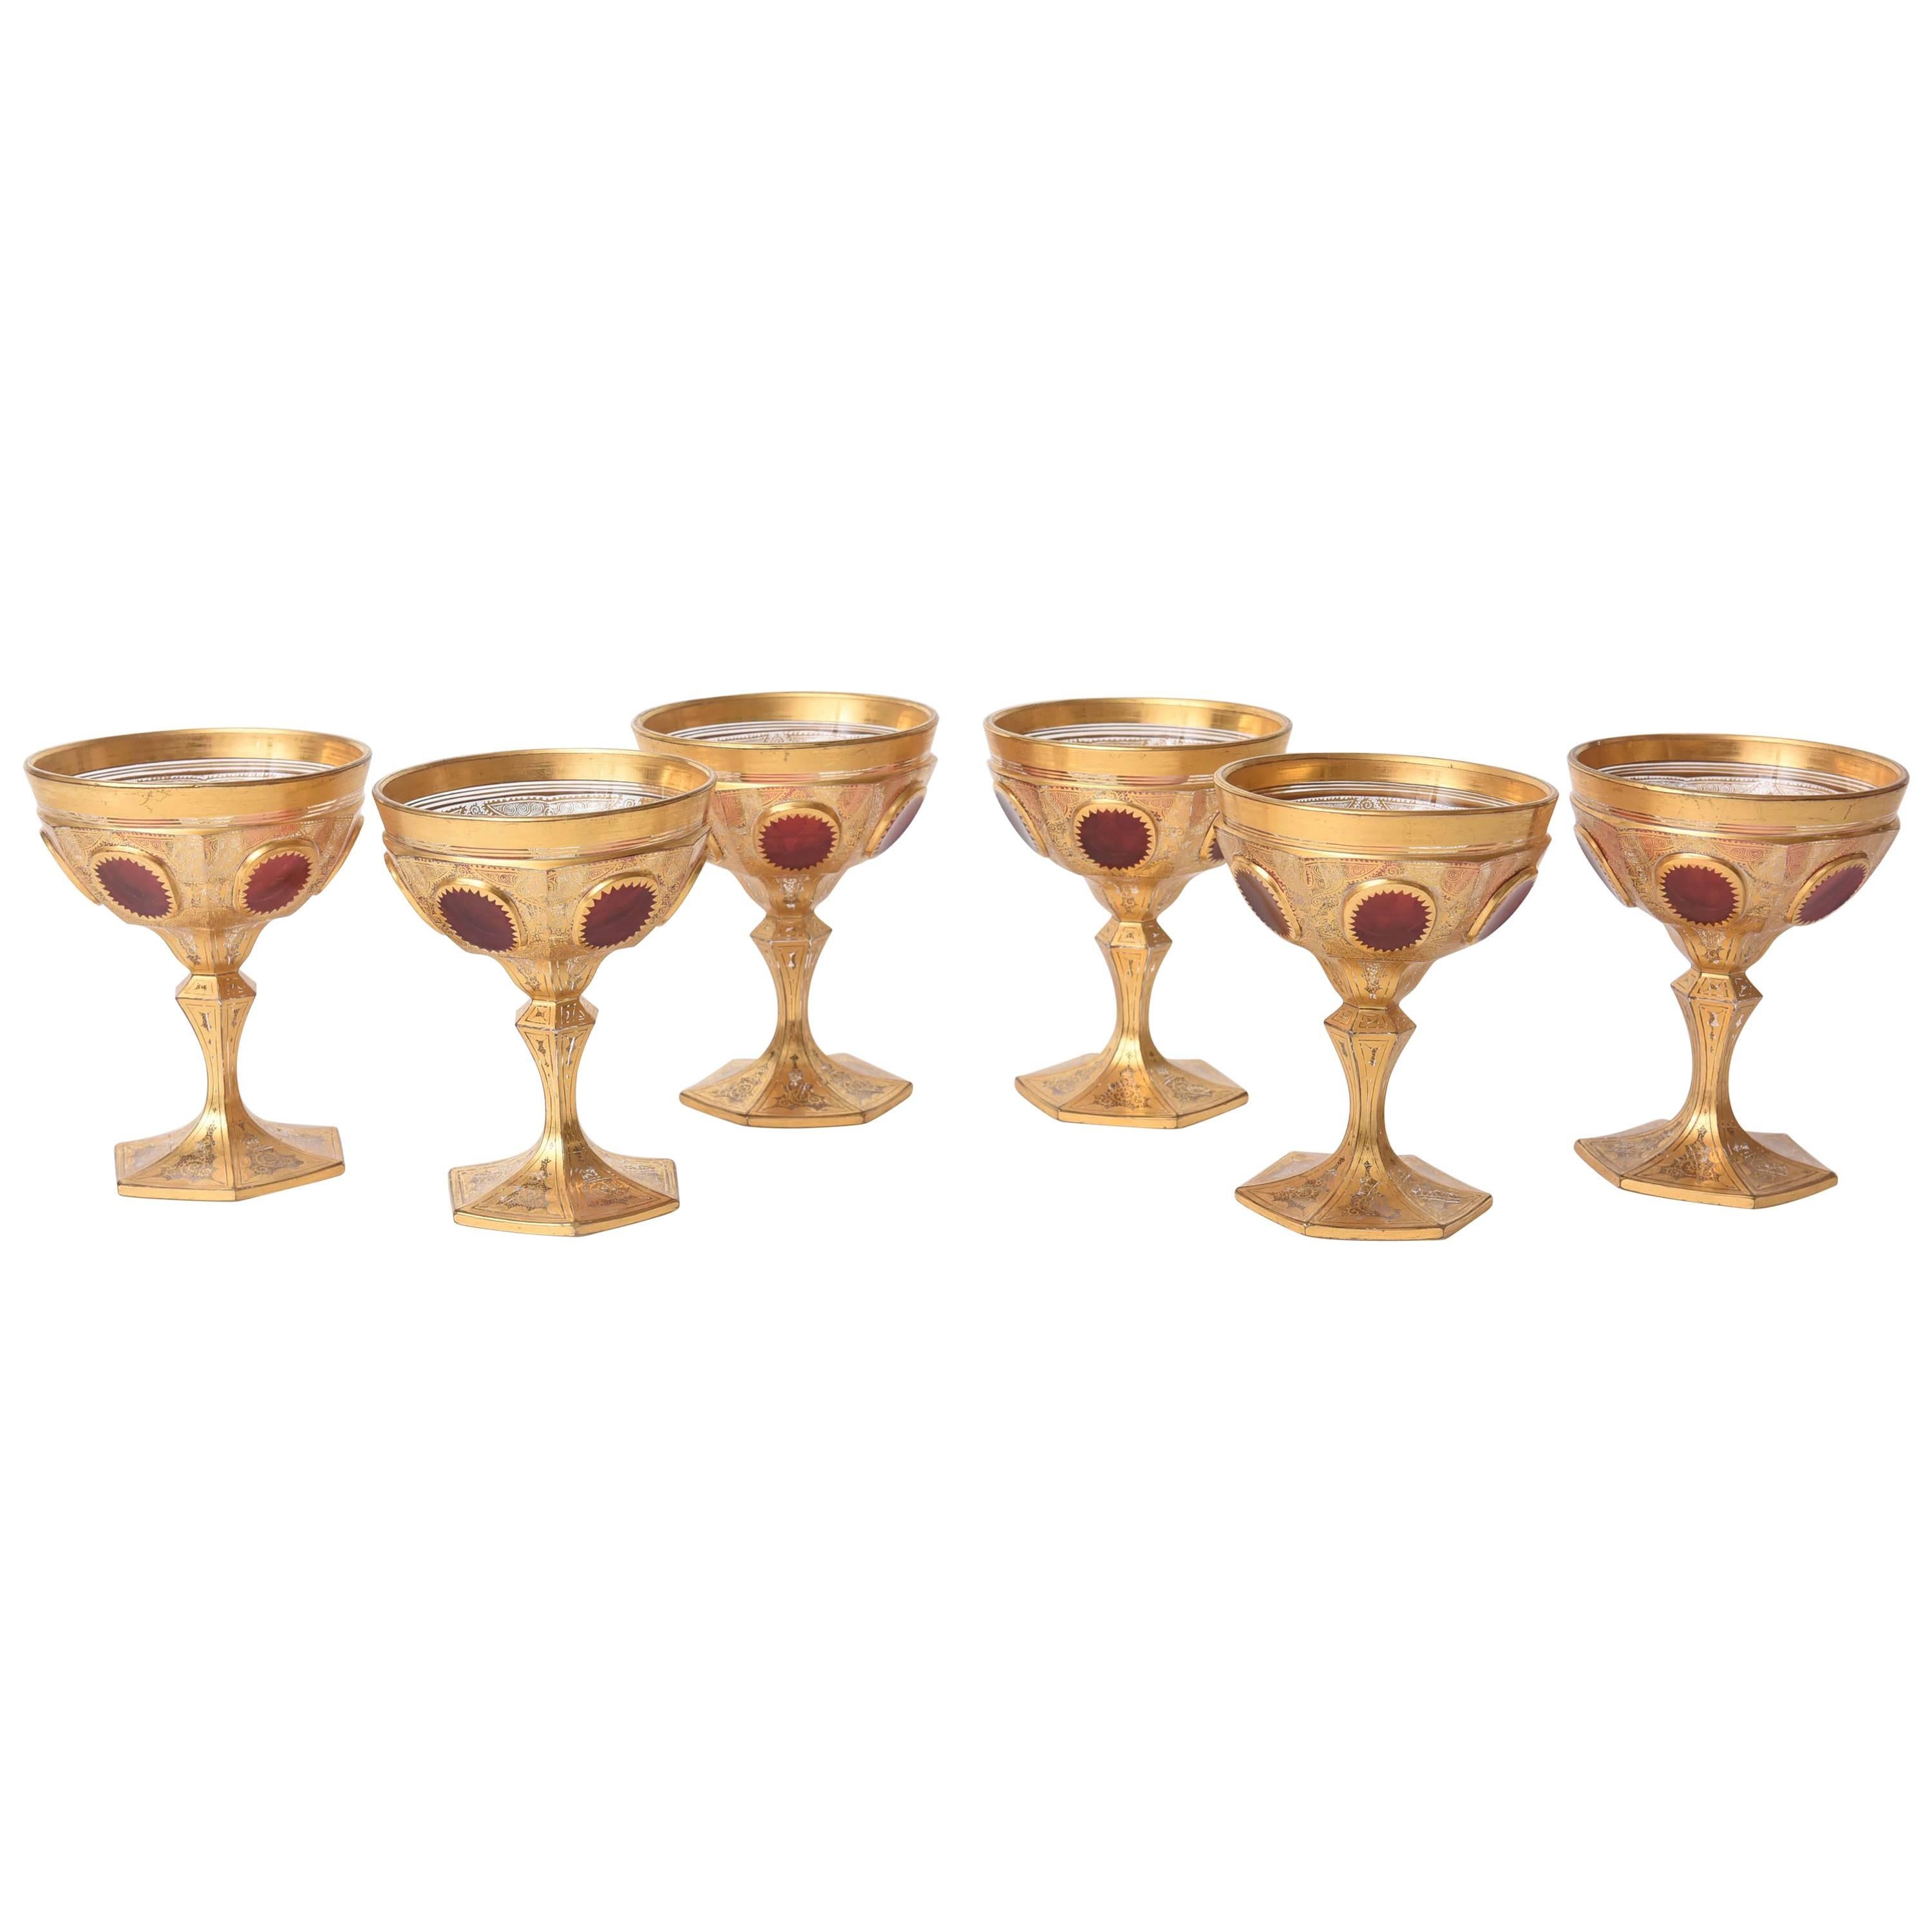 Six Elaborate Gilt Encrusted Ruby Cabochon Style Antique Moser Goblets